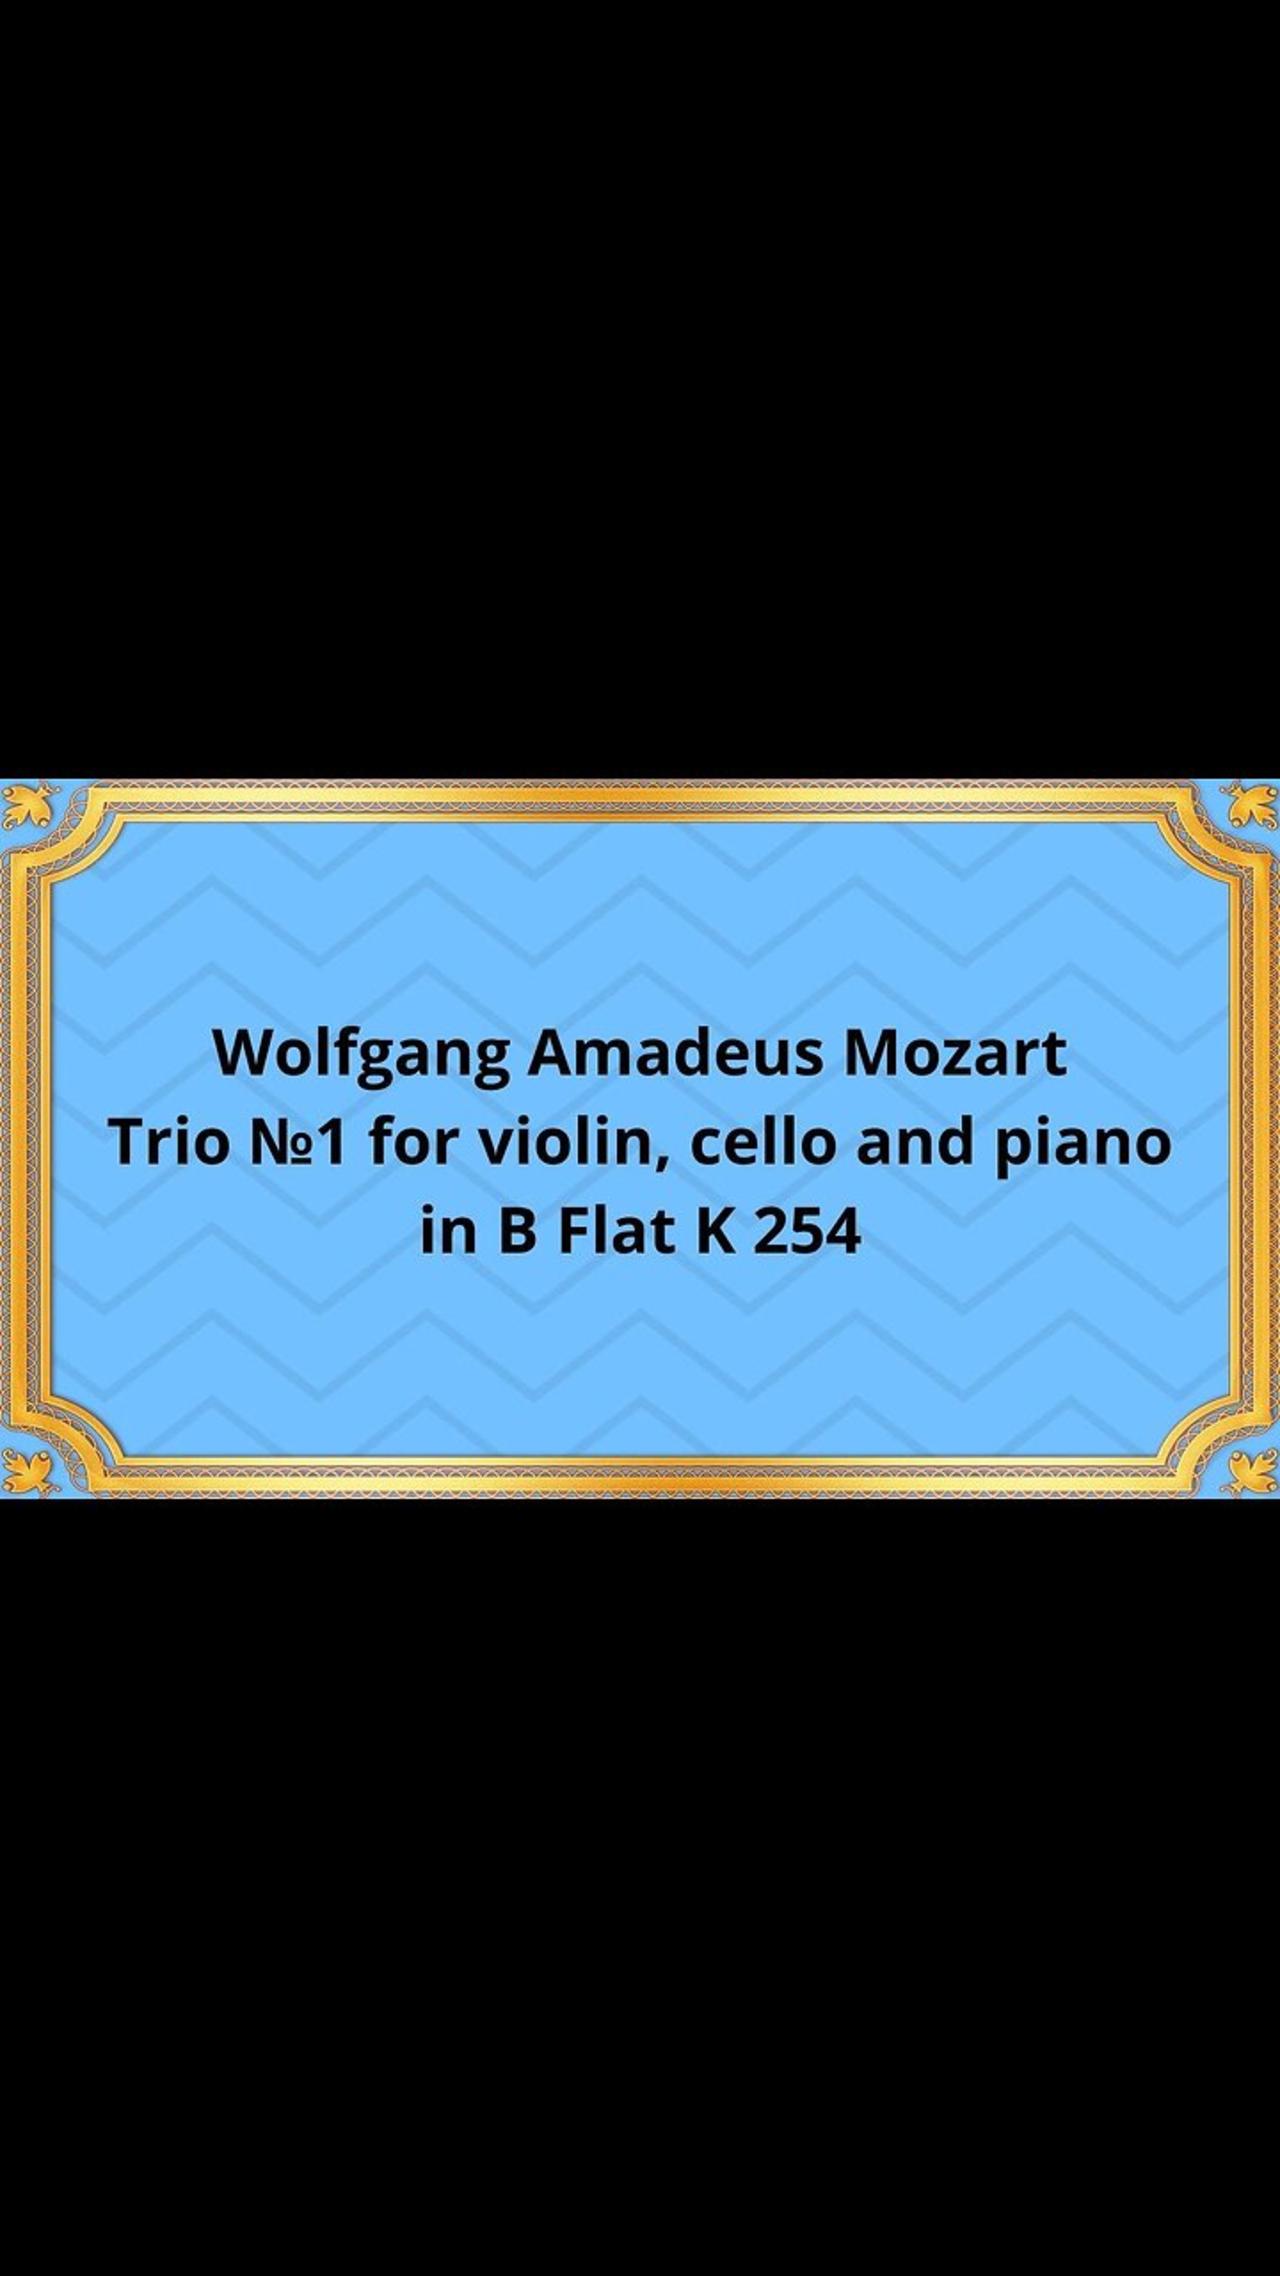 Wolfgang Amadeus Mozart Trio №1 for violin, cello and piano in B Flat K 254